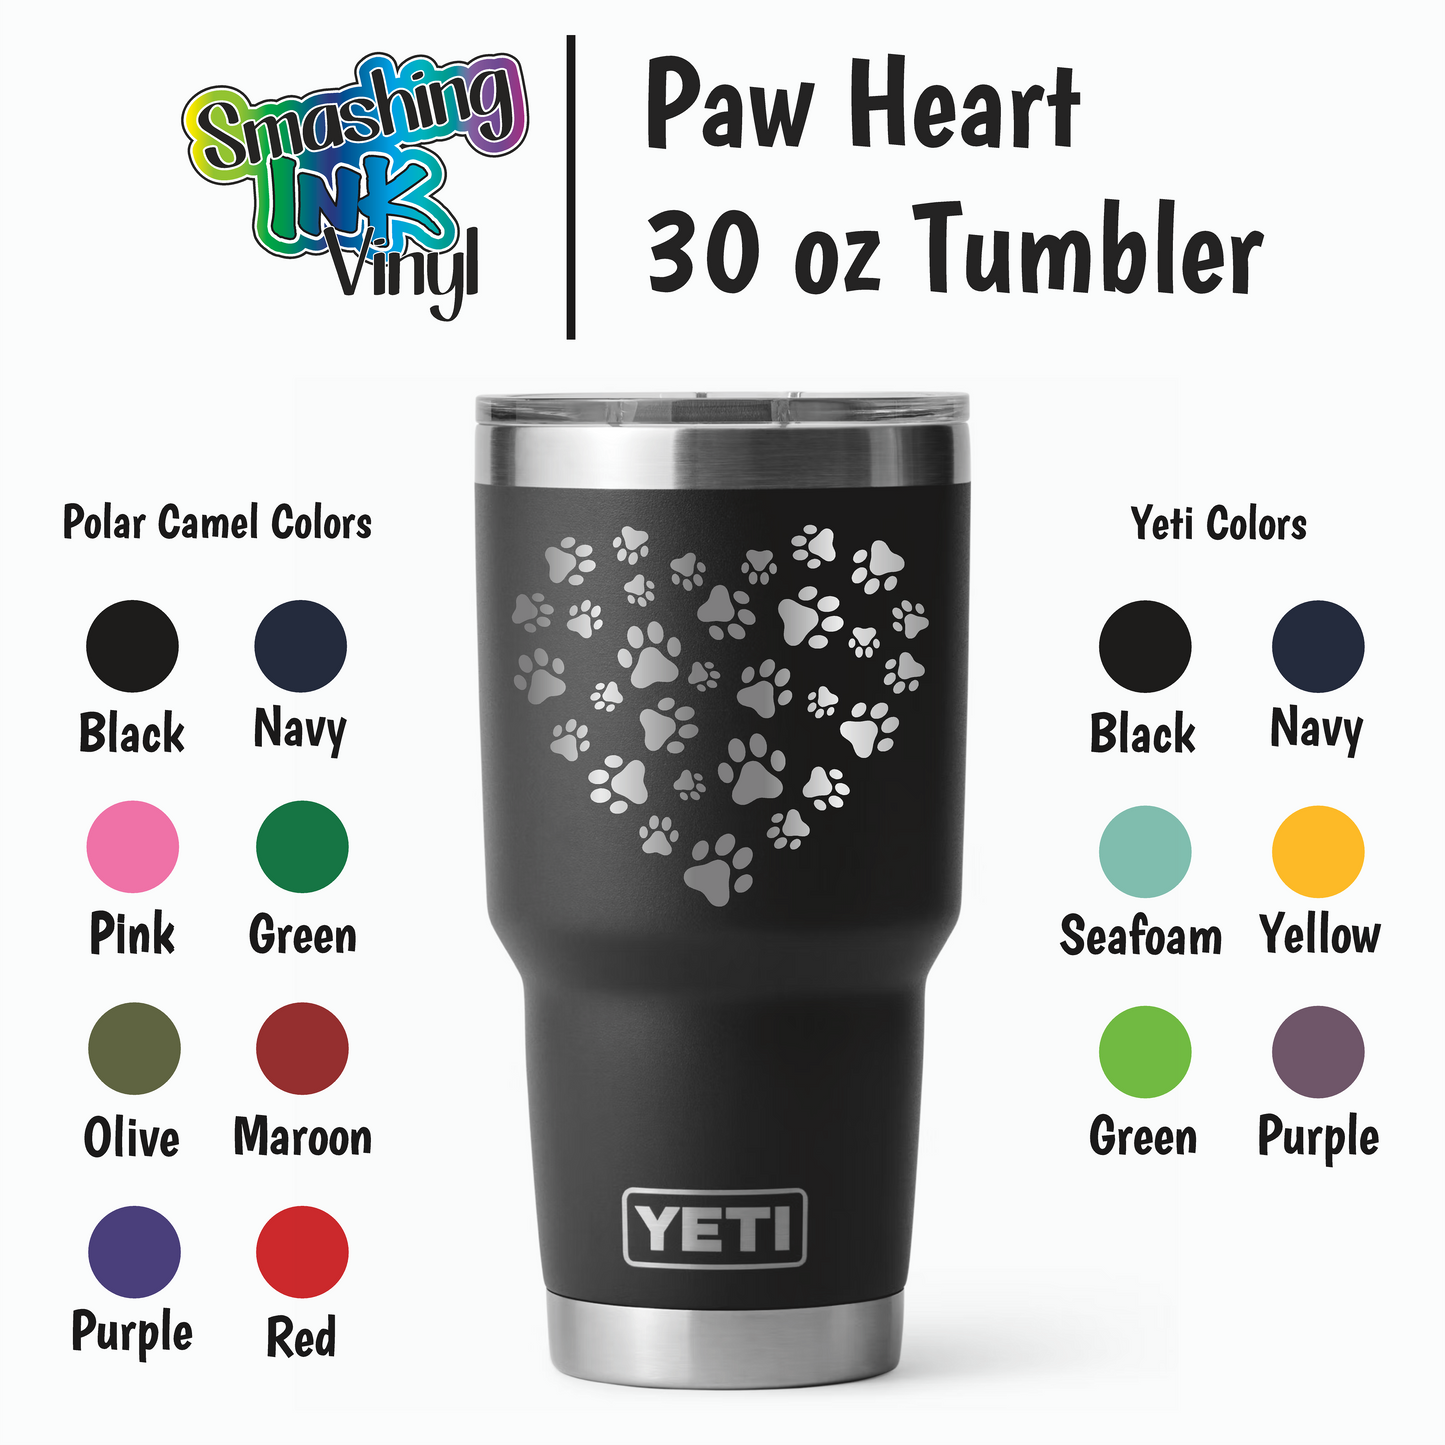 Paw Heart - Engraved Tumblers